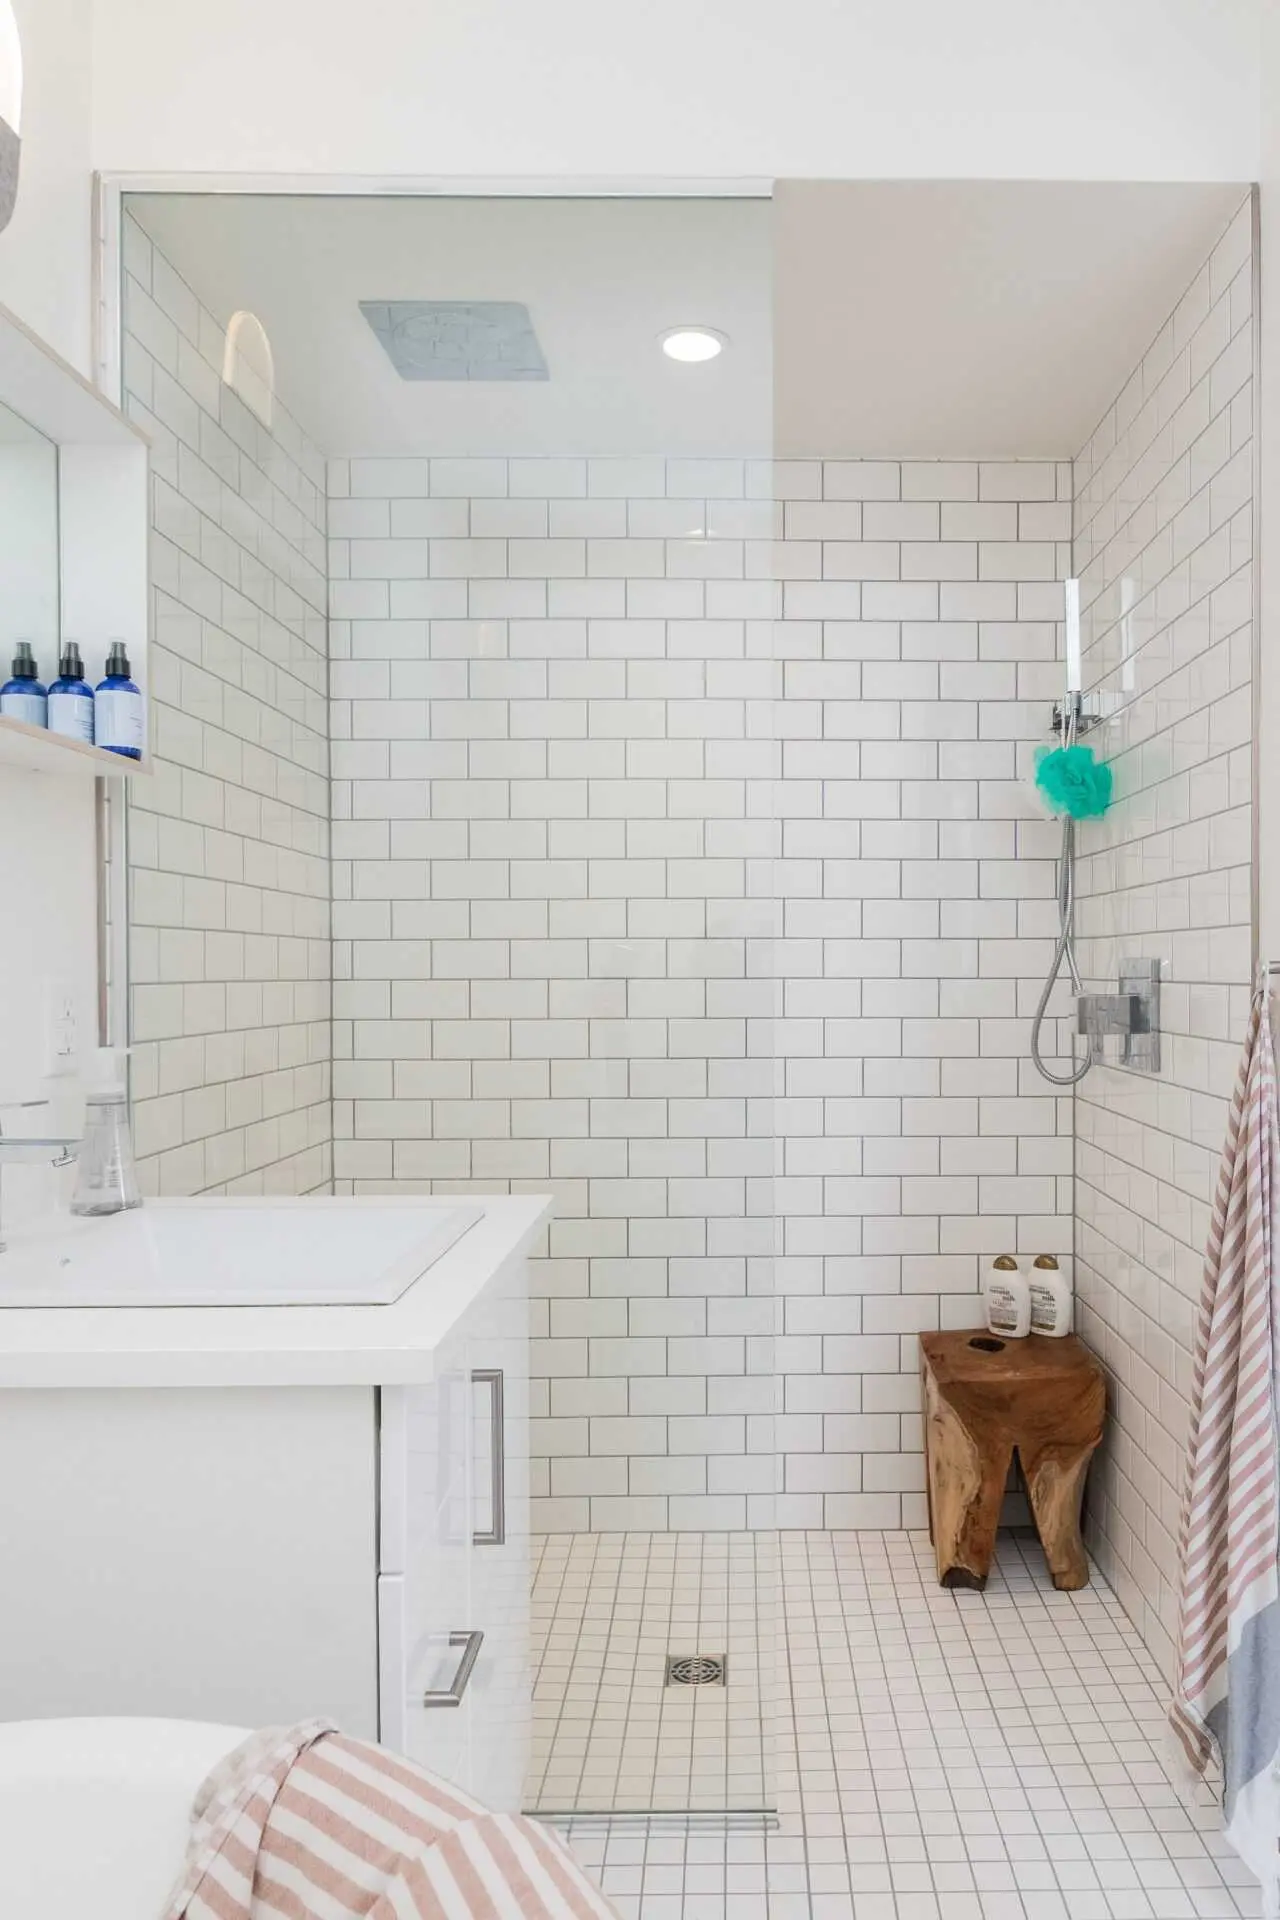 an image about Modern bathroom with white subway tiles, walk-in shower, and wooden stool.